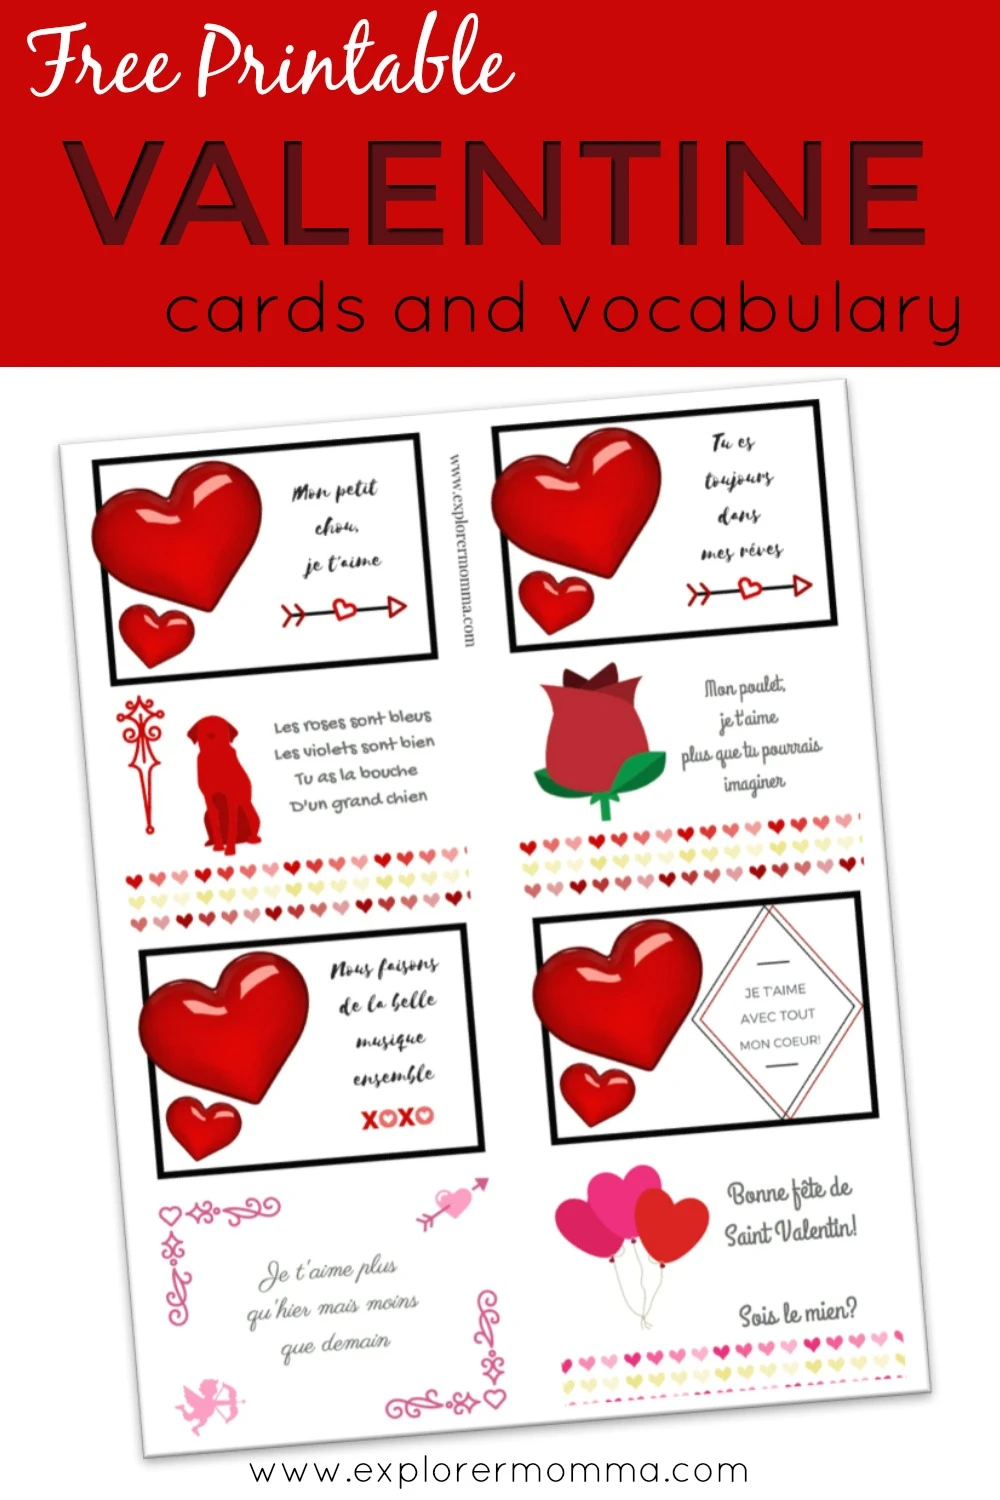 Printable Valentine cards preview pin